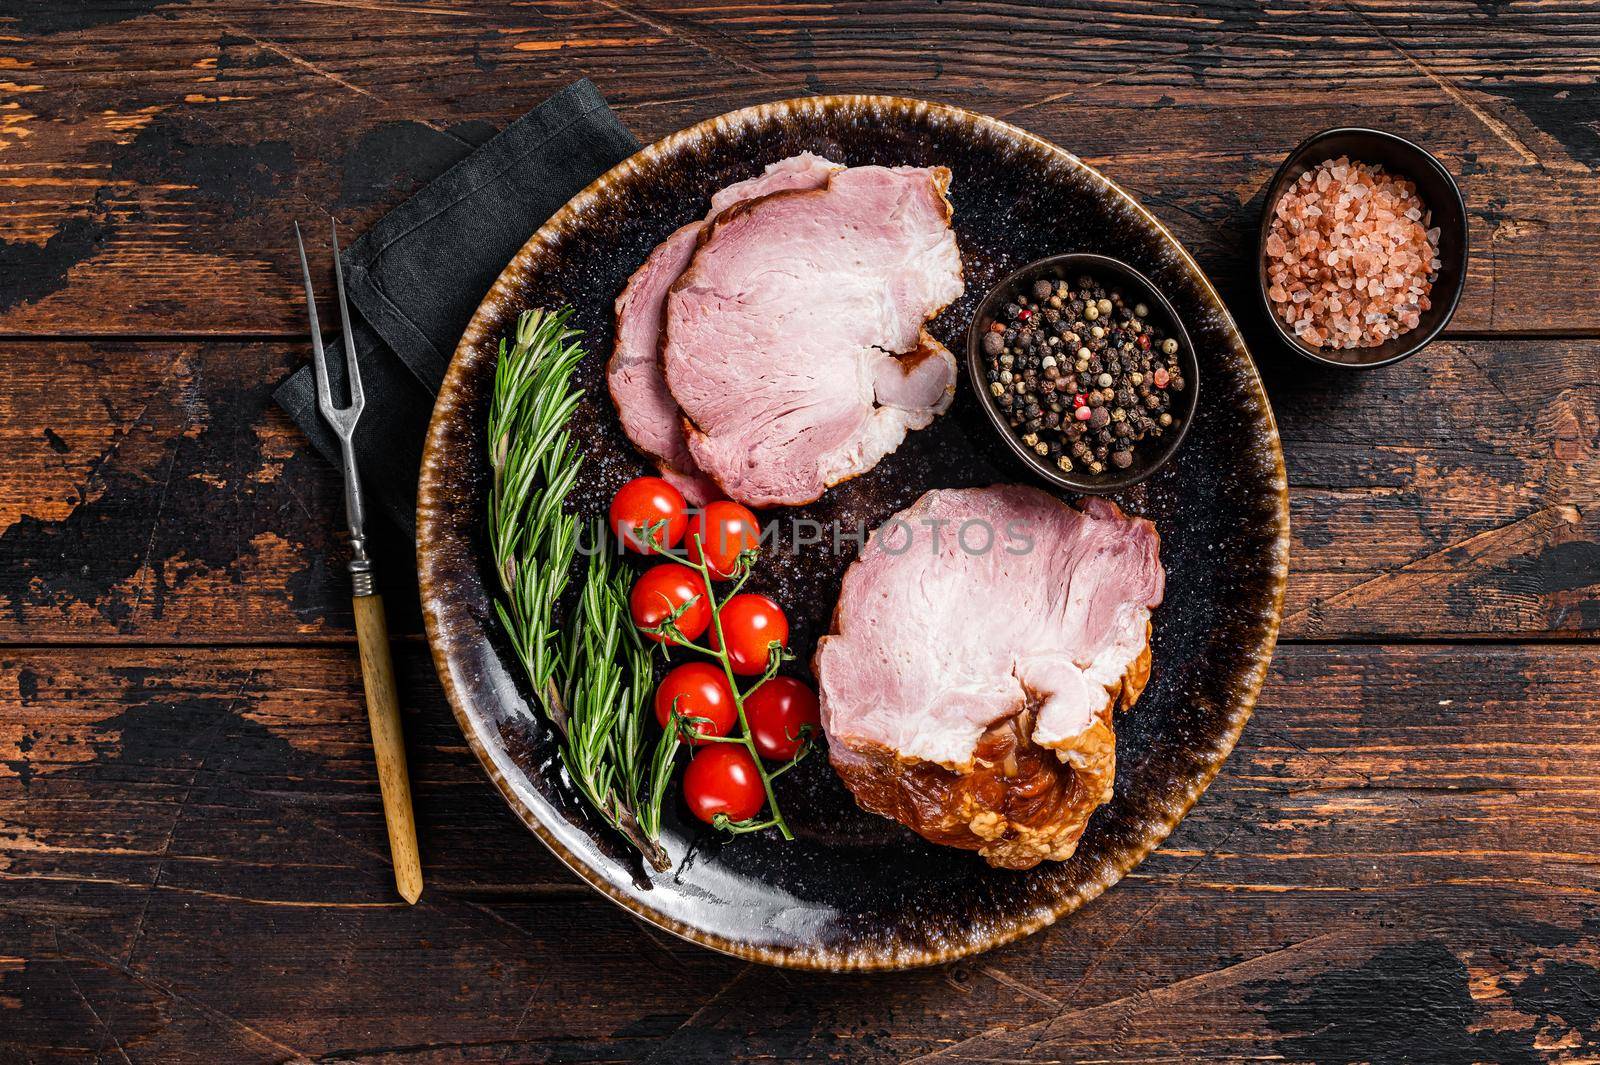 Smoked pork meat - gammon with herbs on rustic plate. Wooden background. Top view by Composter